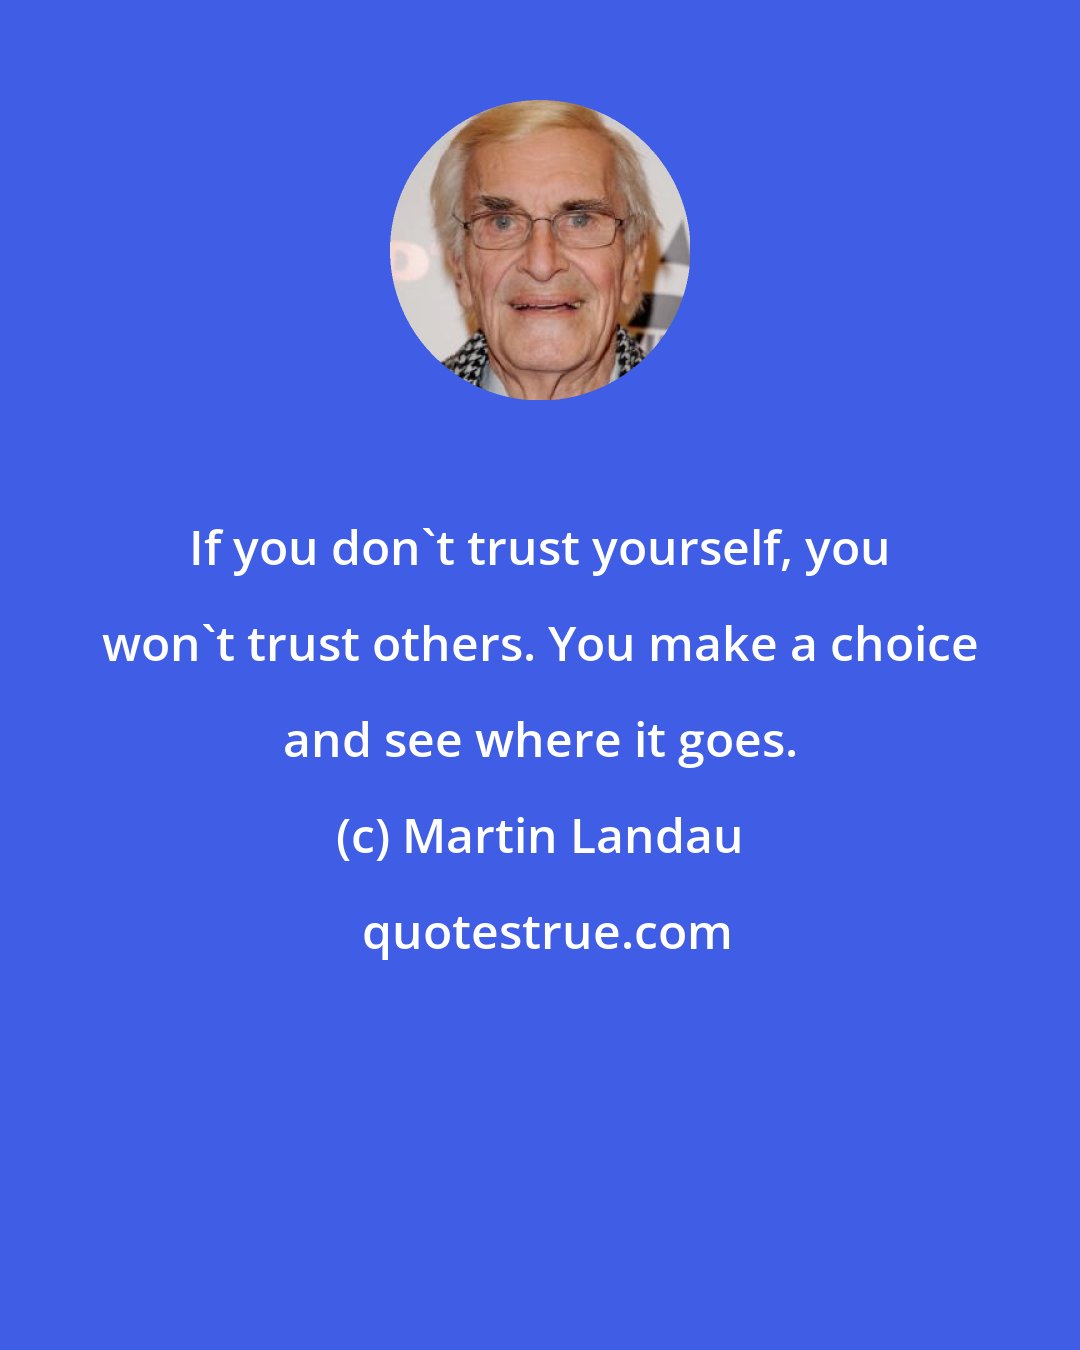 Martin Landau: If you don't trust yourself, you won't trust others. You make a choice and see where it goes.